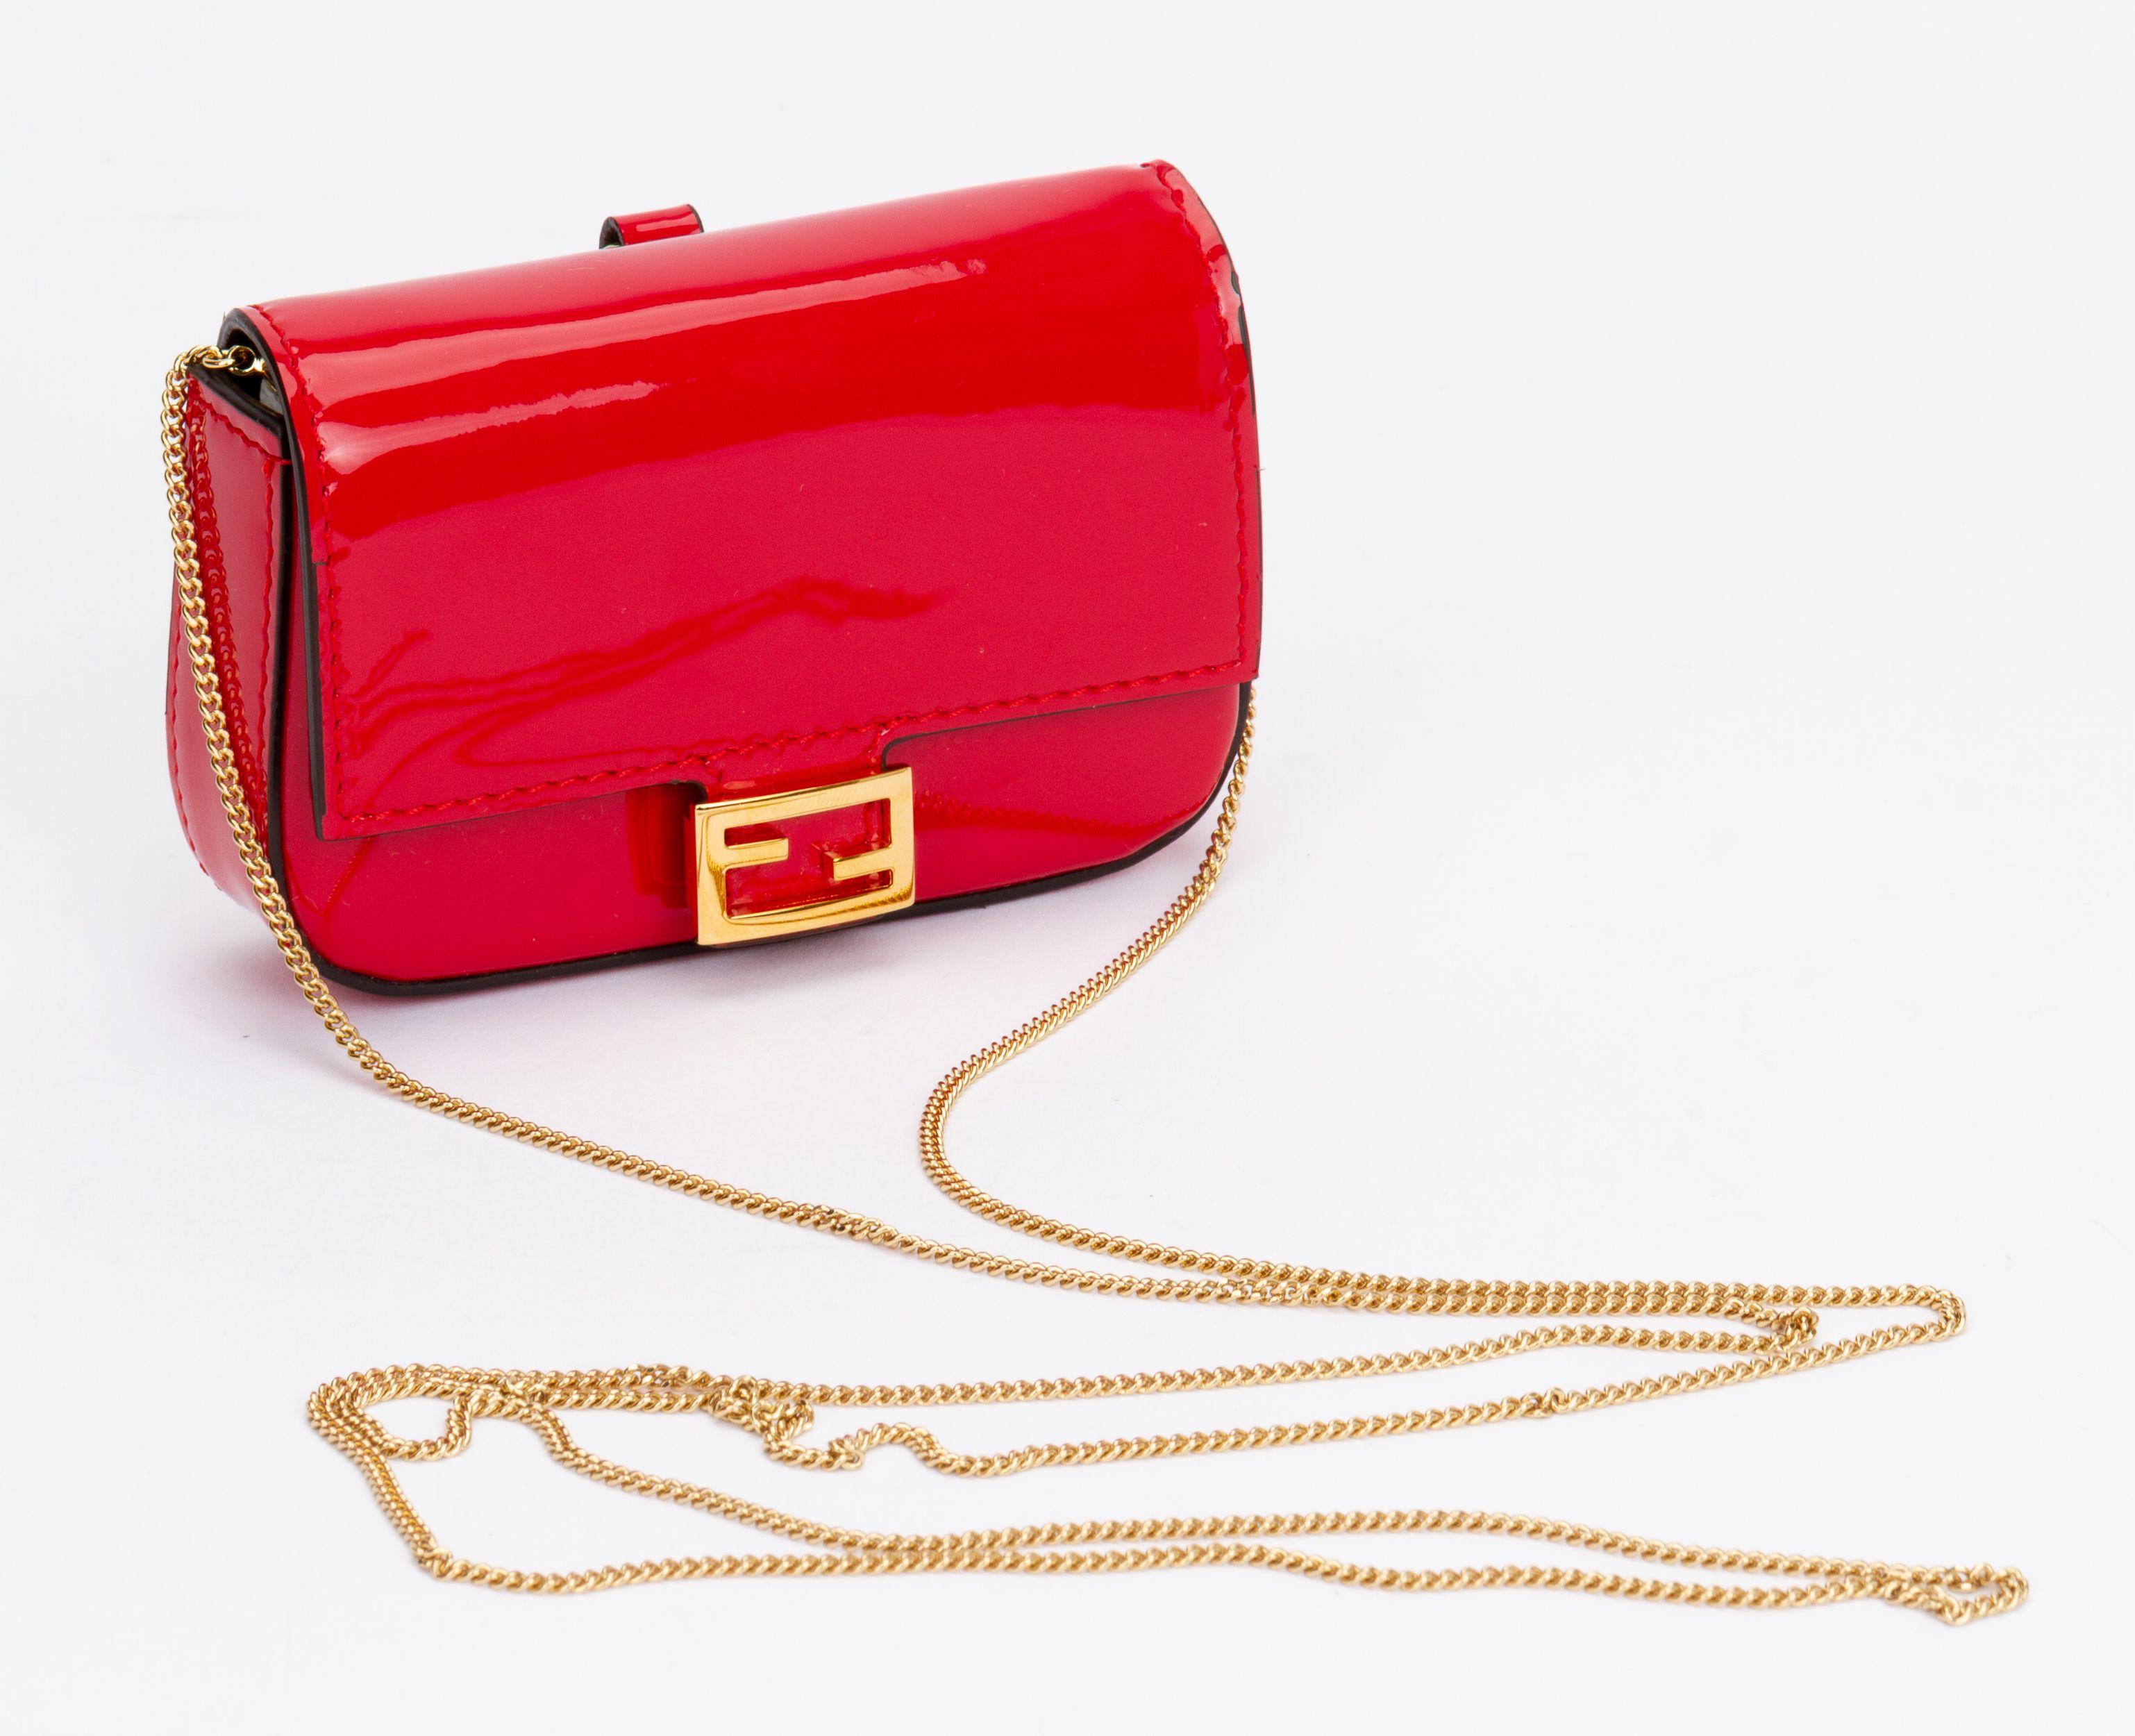 Fendi nano baguette bag charm made of red patent leather. It comes with gold tone hard which also contains a detachable shoulder strap (drop 23.5